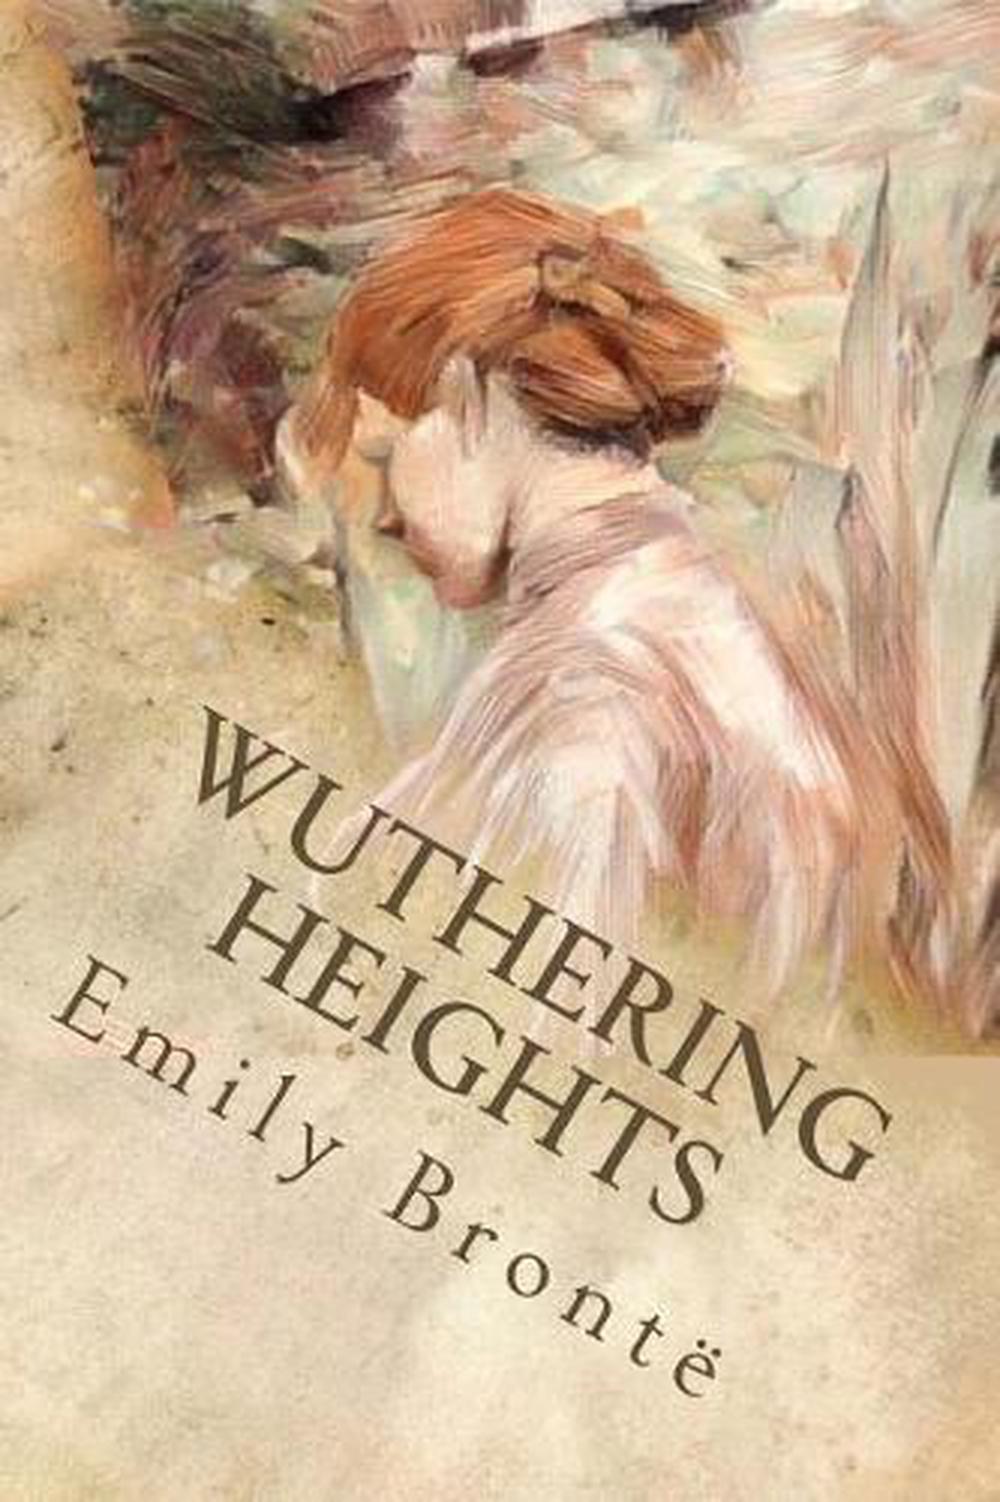 Wuthering Heights by Emily Bront (English) Paperback Book Free Shipping ...